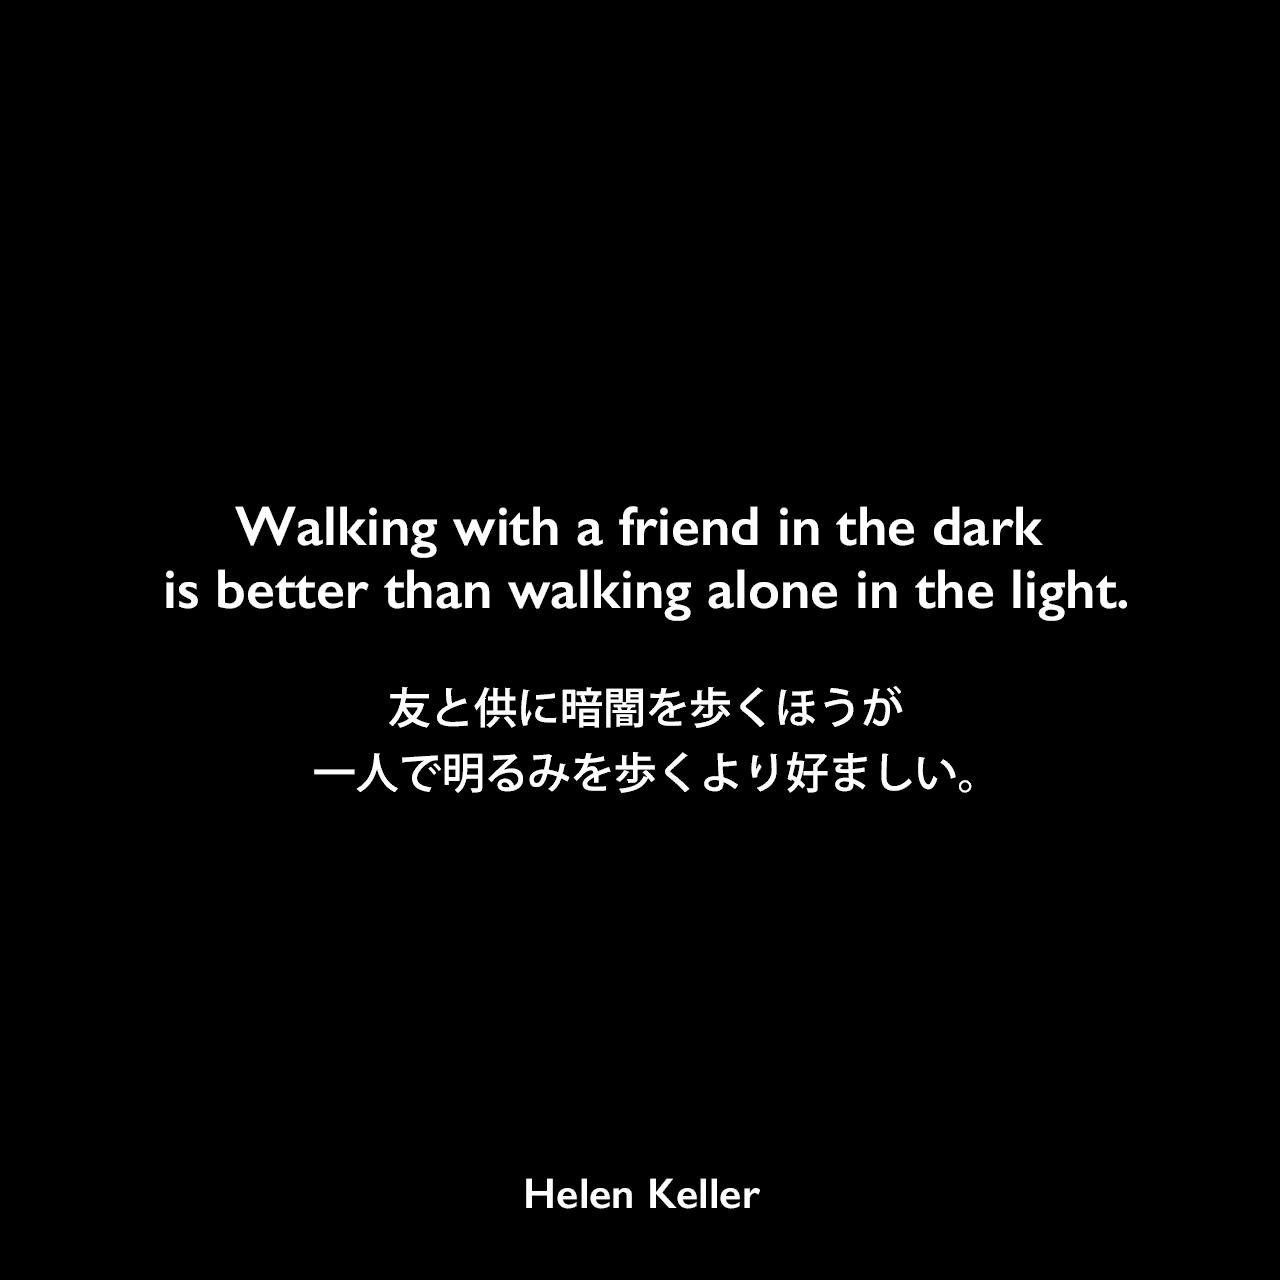 Walking with a friend in the dark is better than walking alone in the light.友と供に暗闇を歩くほうが、一人で明るみを歩くより好ましい。Helen Keller